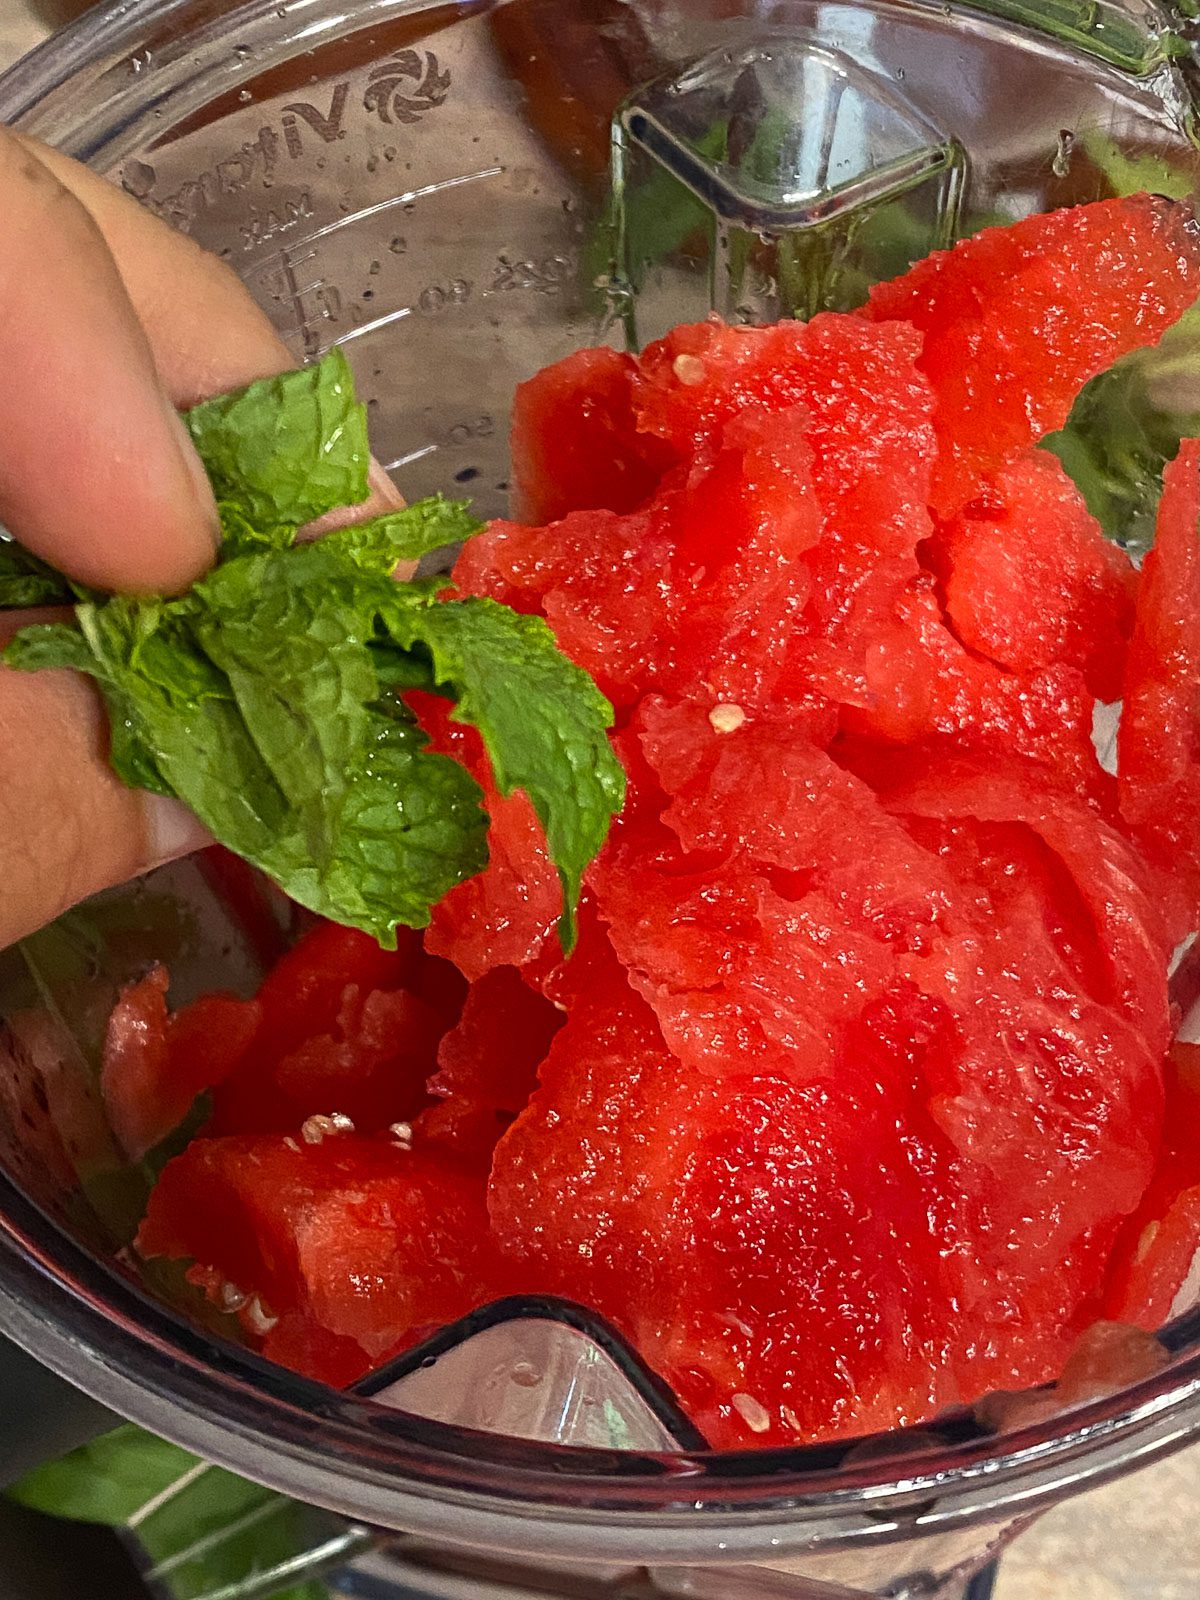 process of adding mint to watermelon mixture in blender